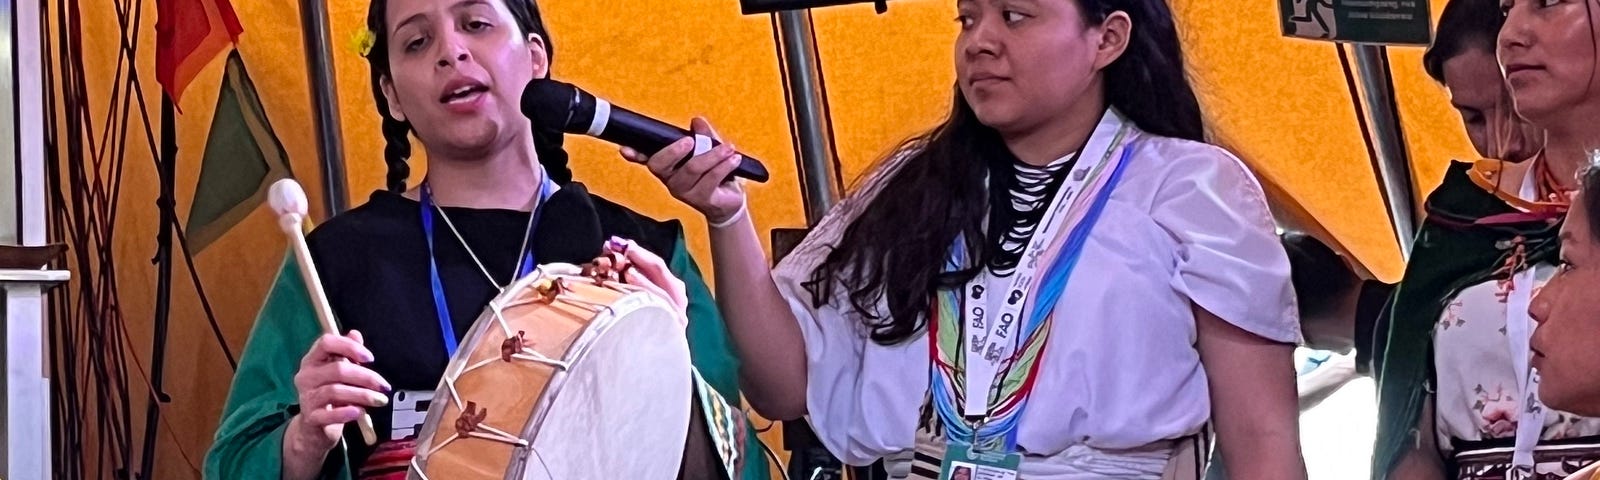 A person holding and playing a tambor drum and singing. Another person next to them is holding a microphone up to capture their performance